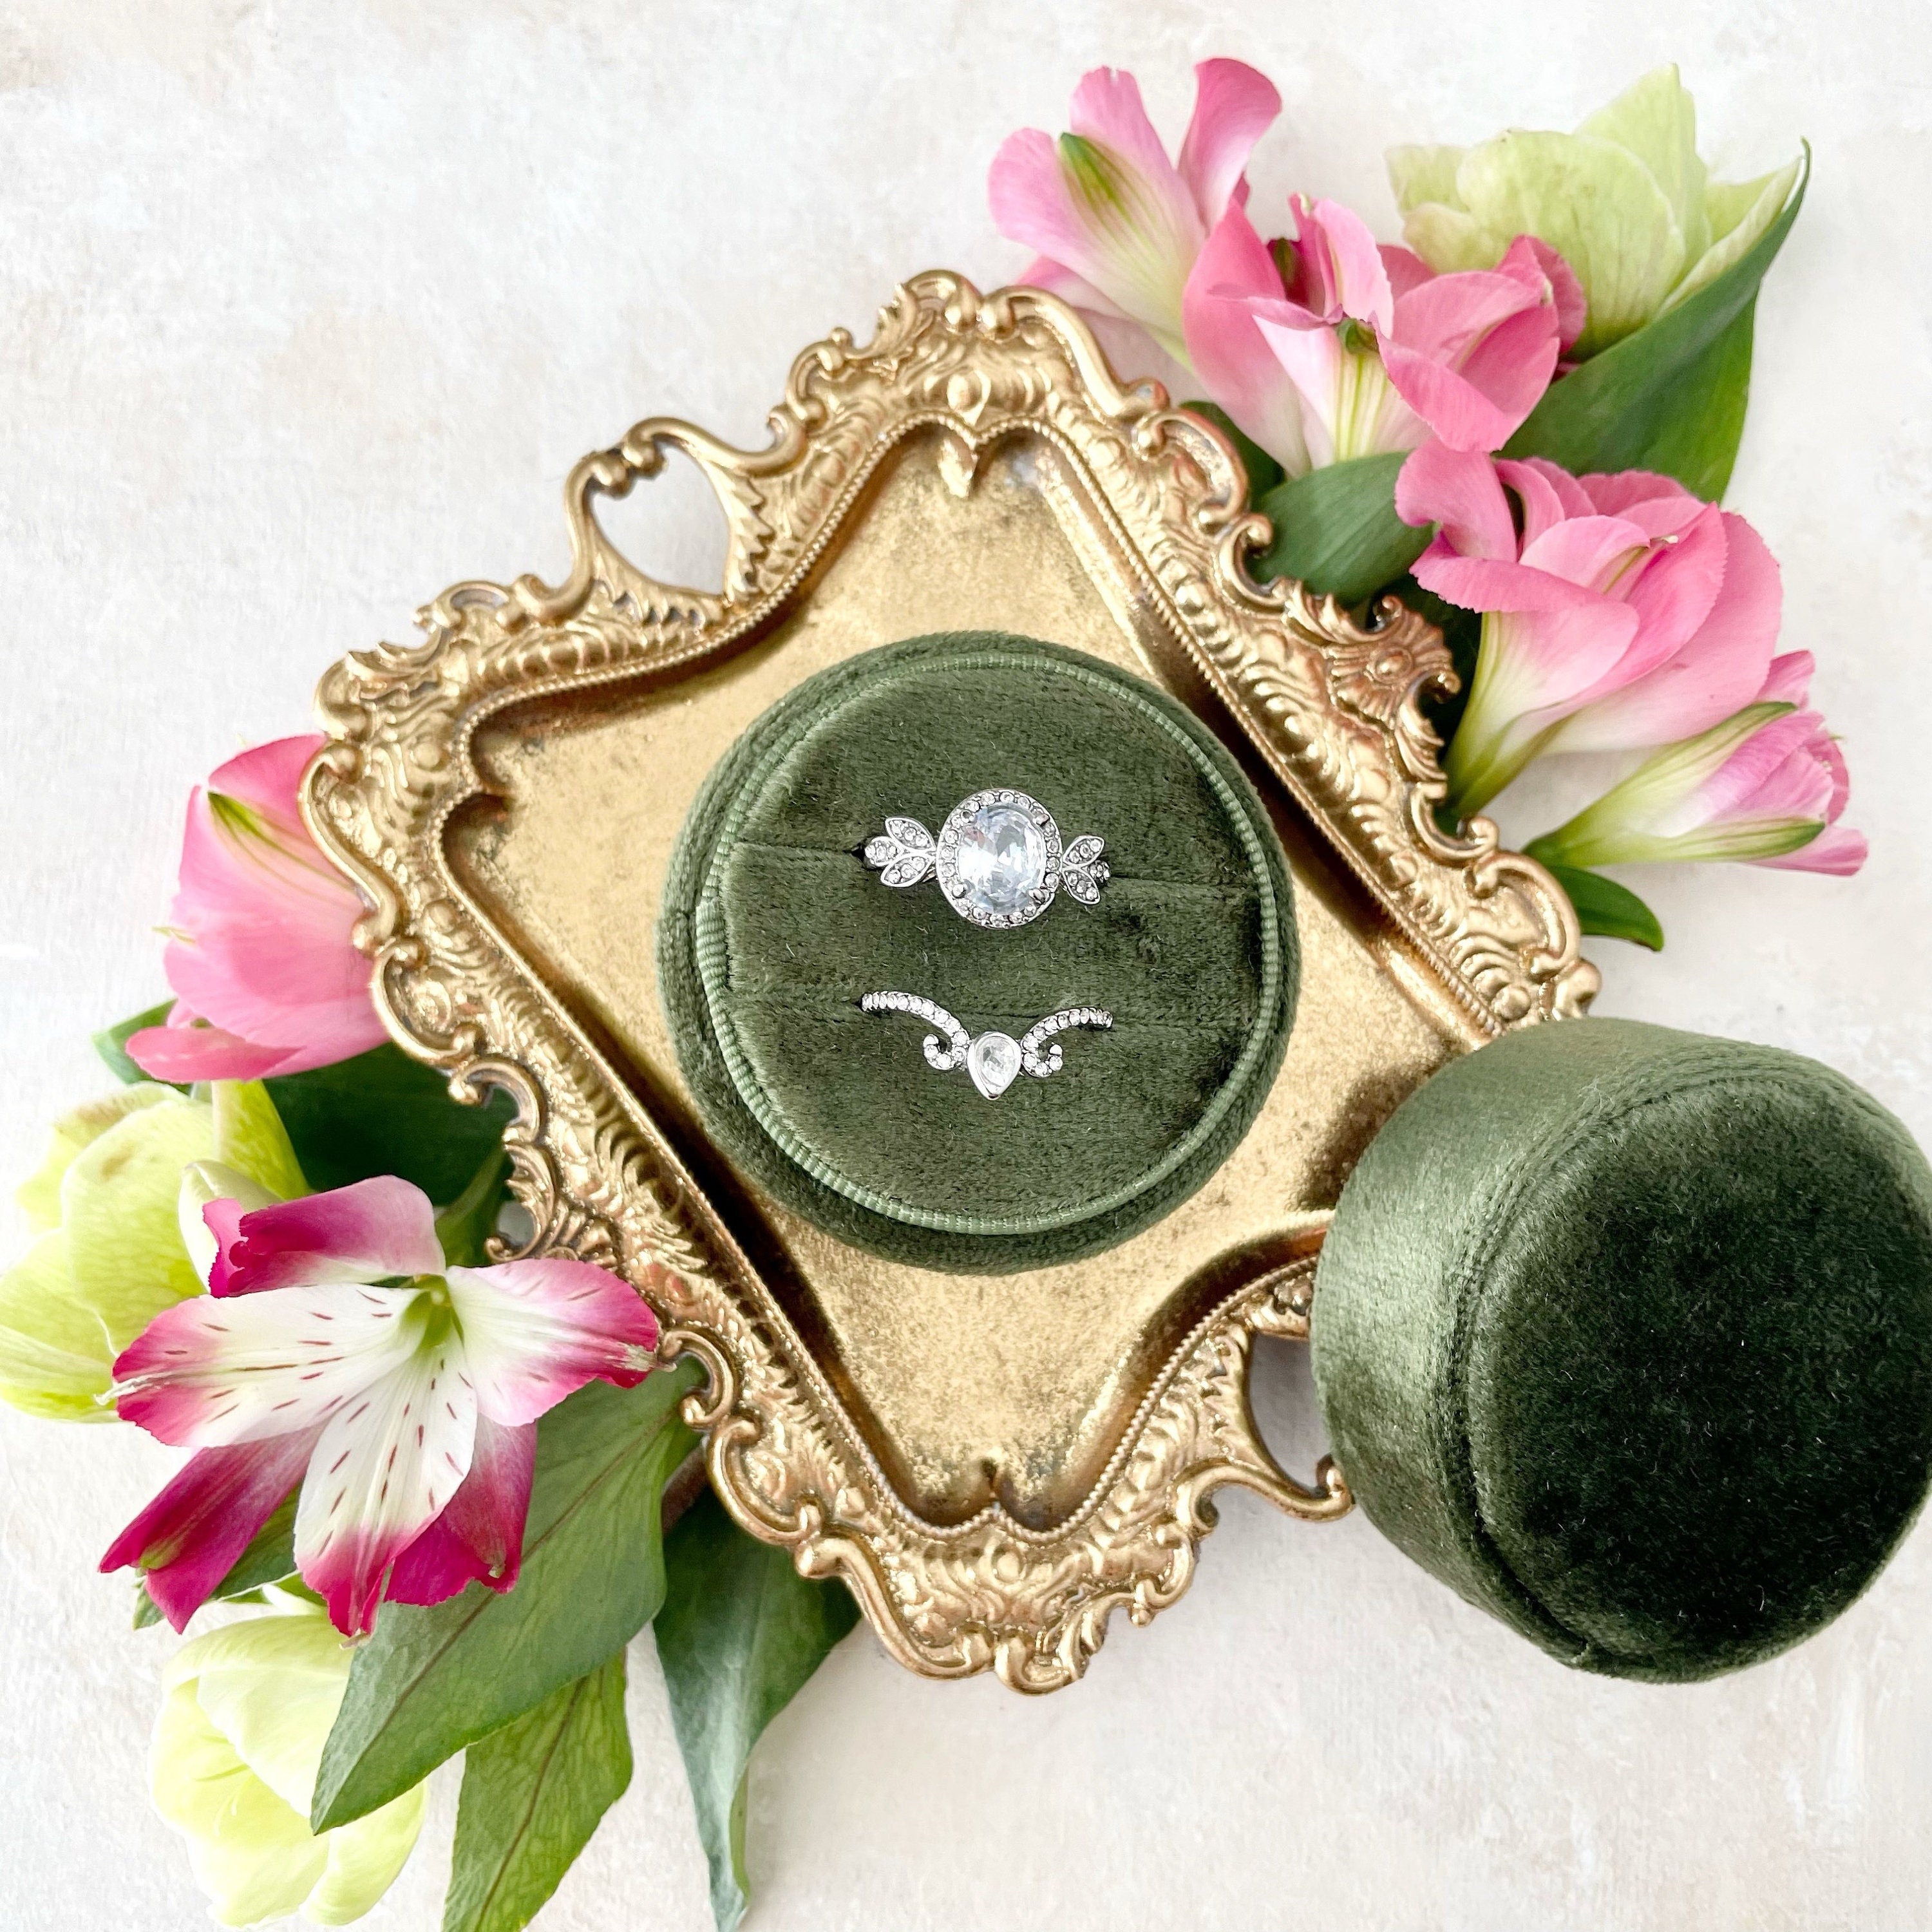 Gold vintage tray for wedding flay lay with olive green ring box and florals - Flat Lay Props from Champagne & GRIT